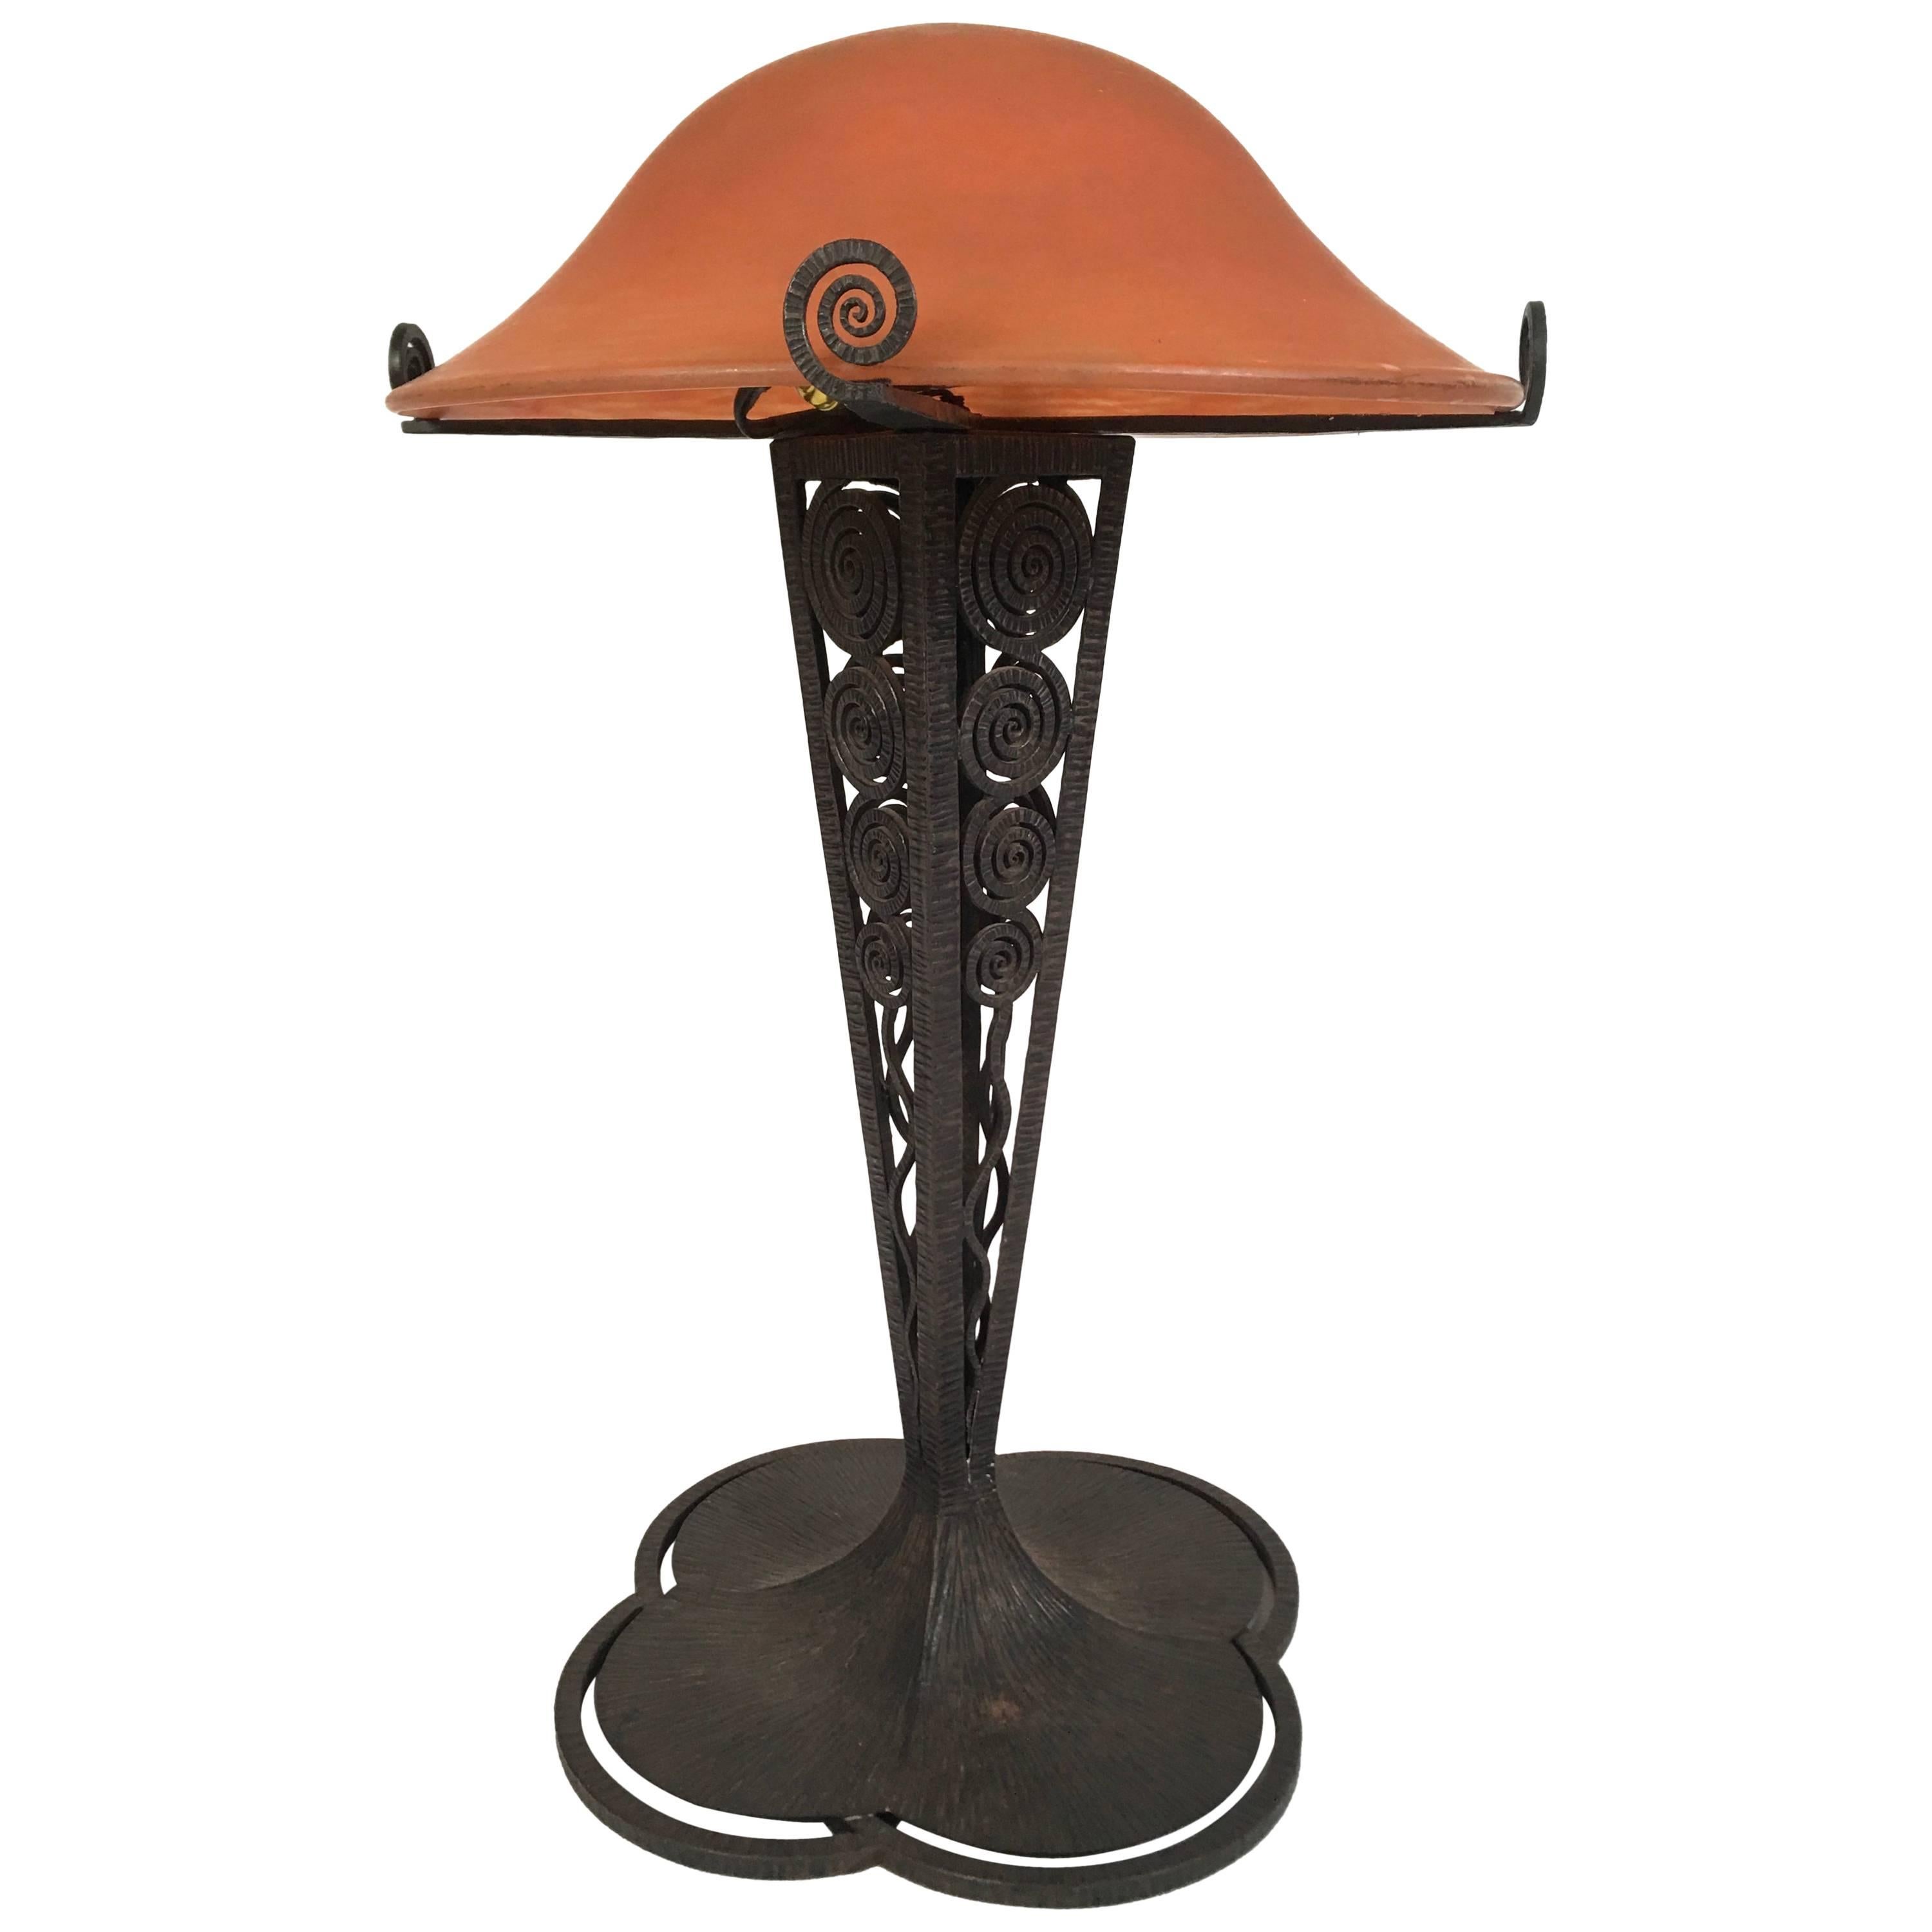 French Art Deco Lamp with Daum Art Glass Shade and Wrought Iron Base